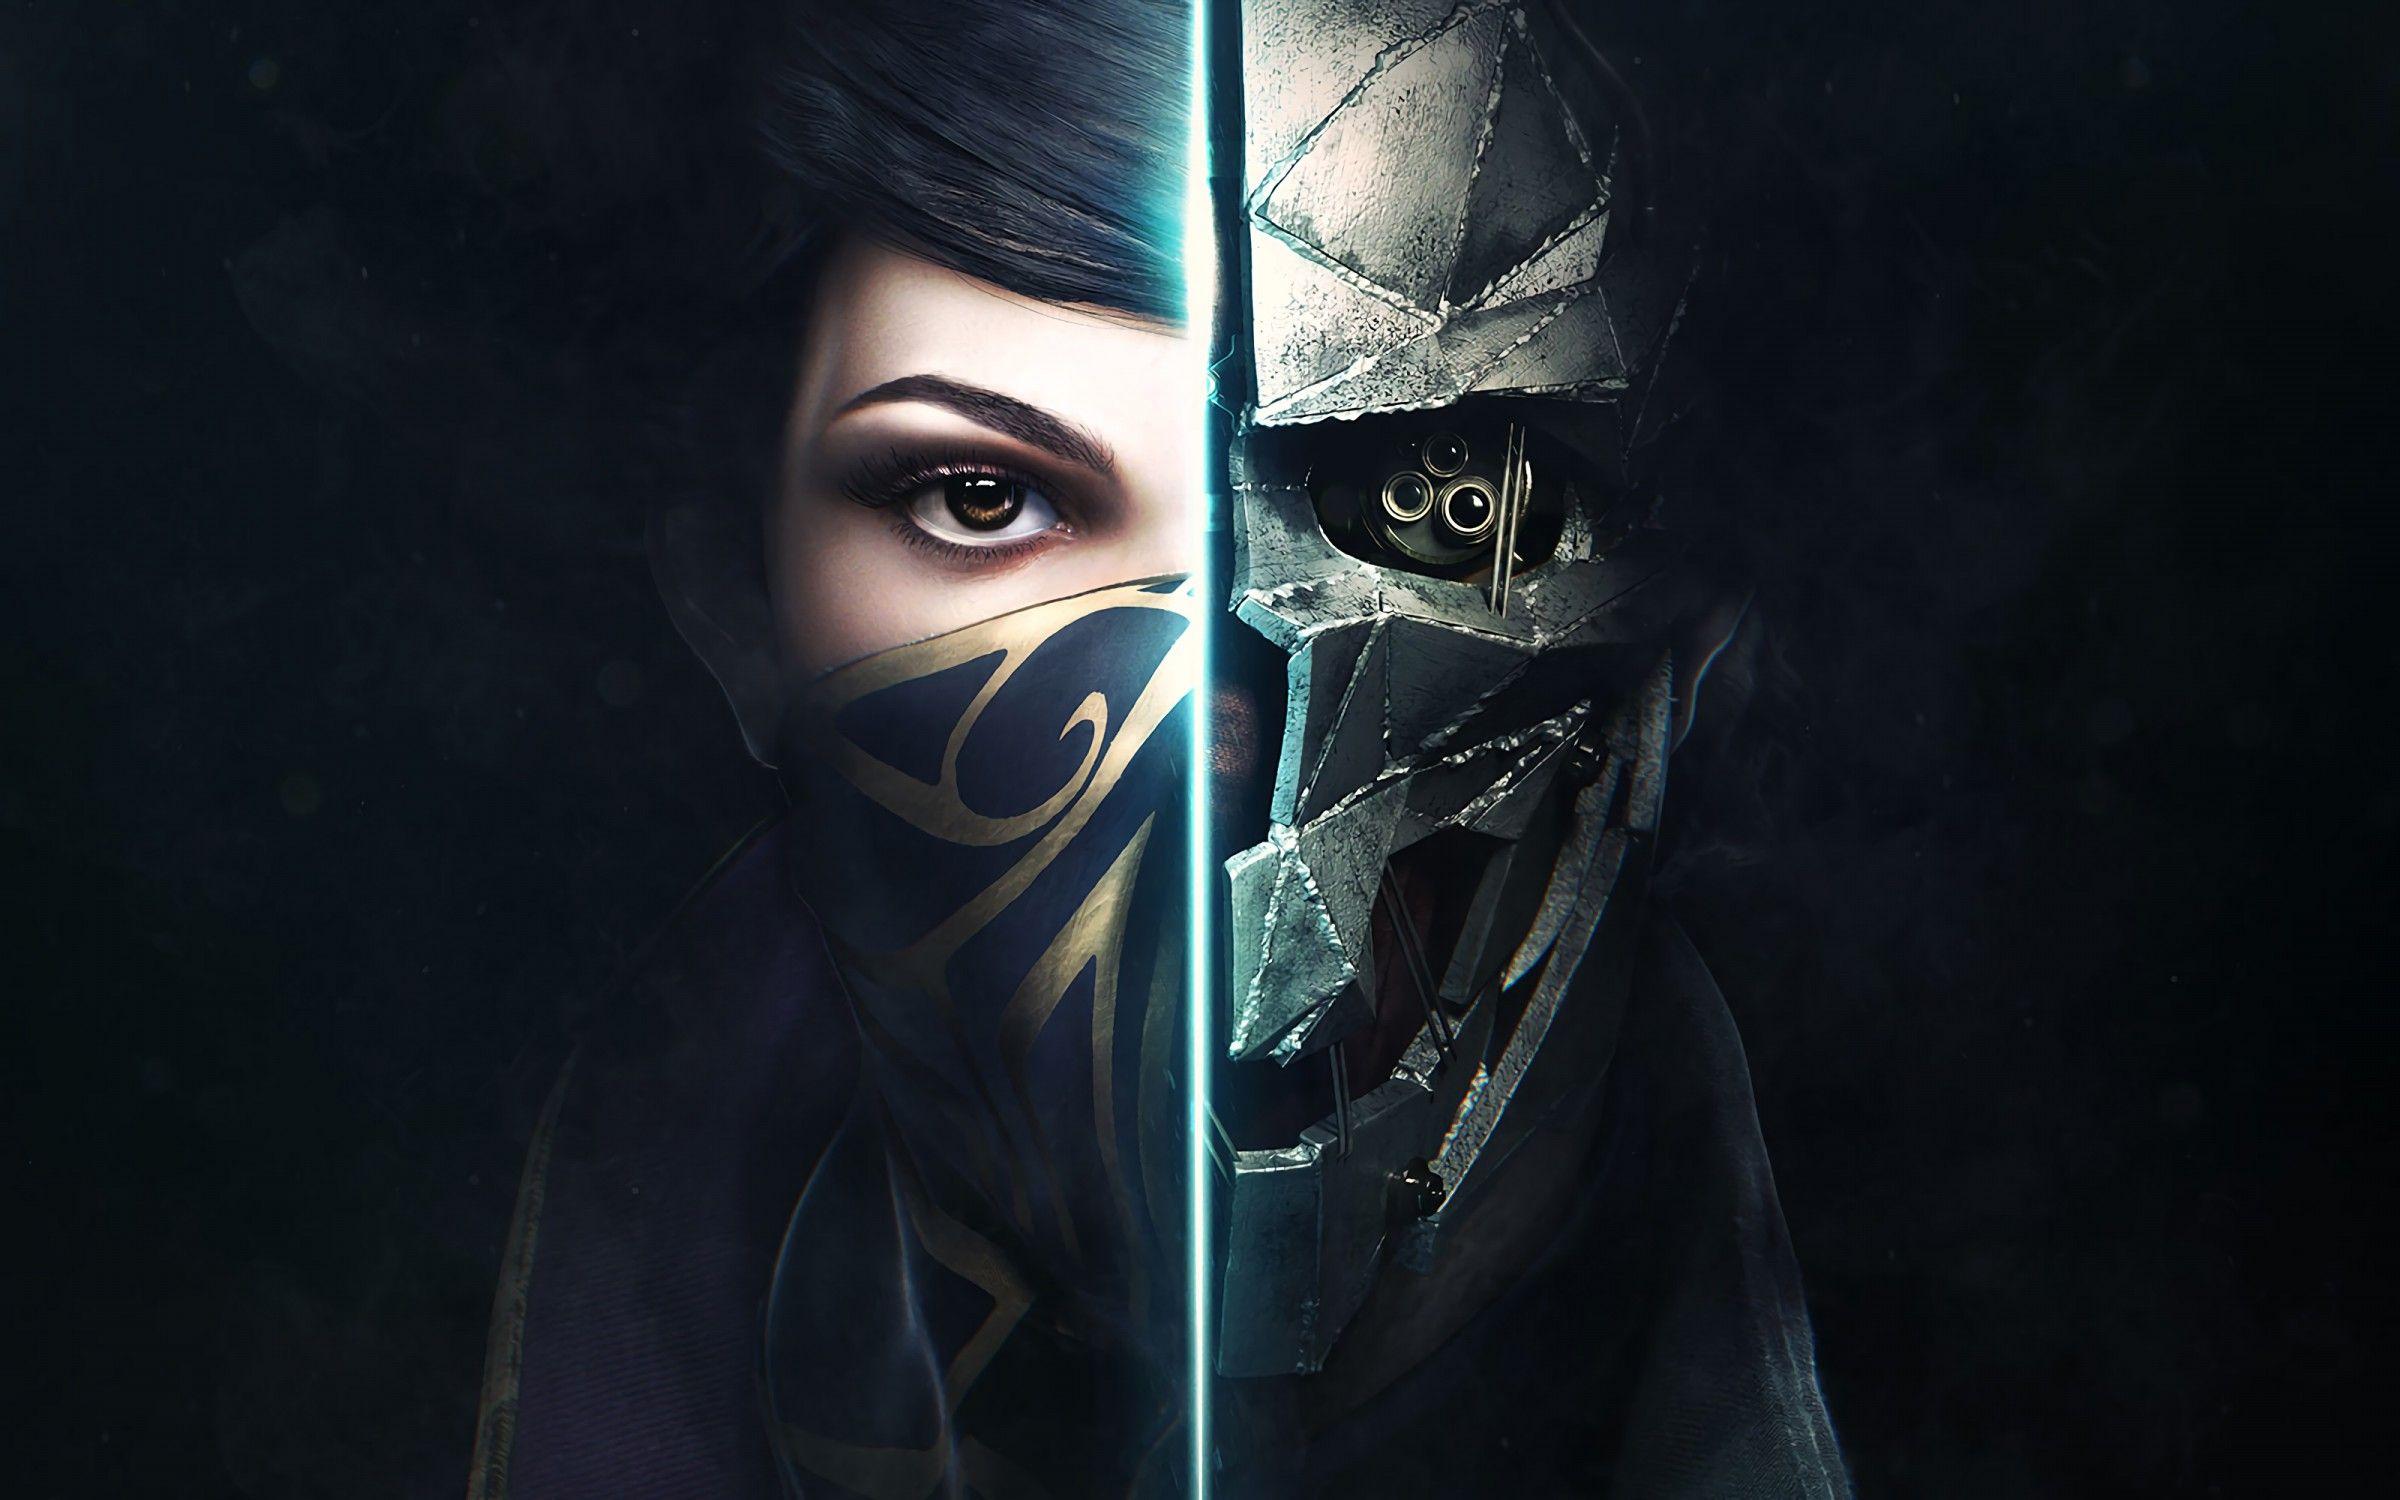 dishonored 2 ps5 download free